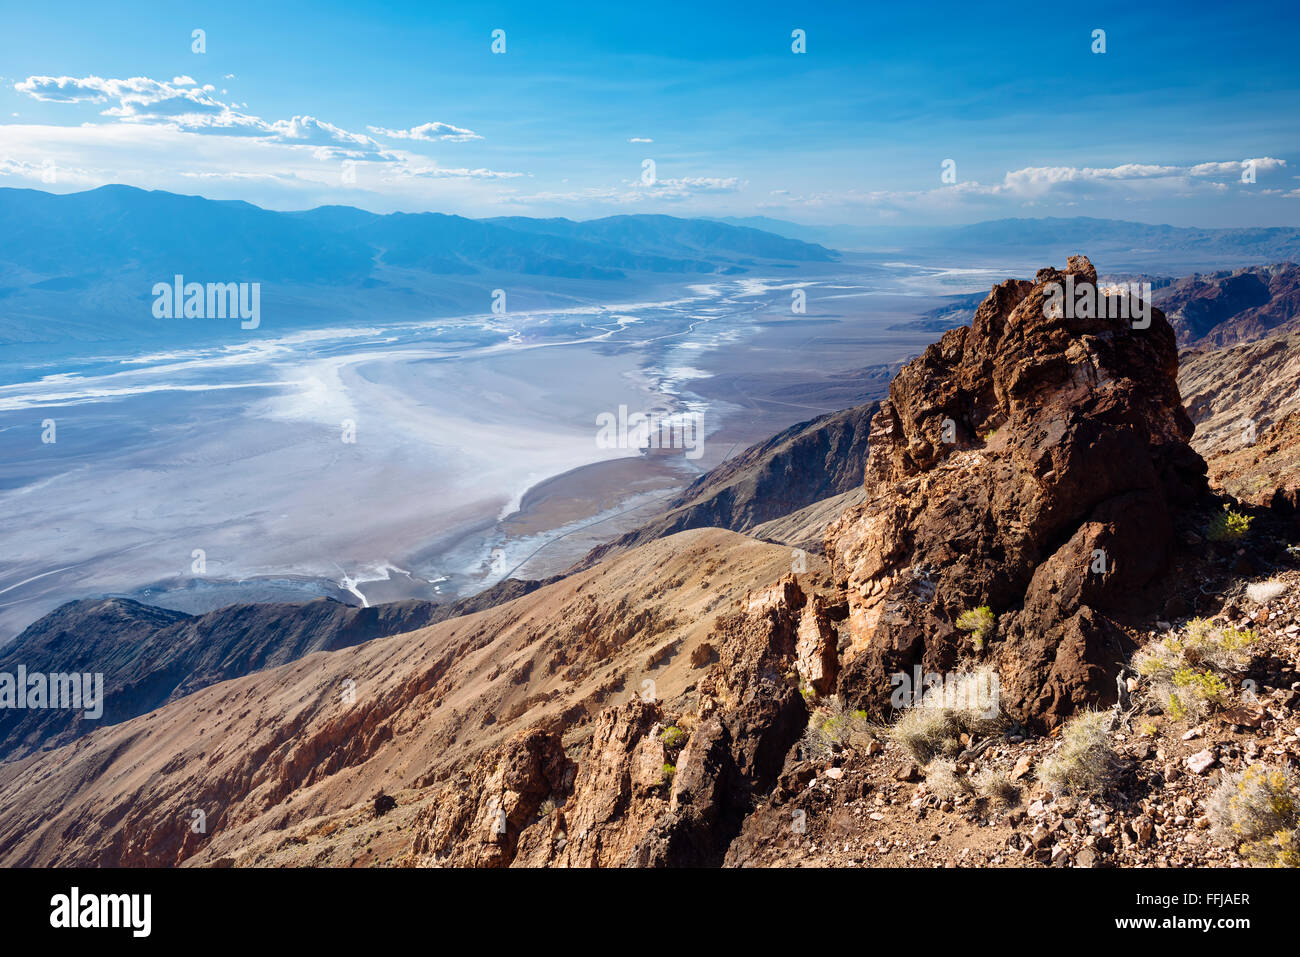 The view from Dante's View, looking down into Death Valley in Death Valley National Park, California Stock Photo